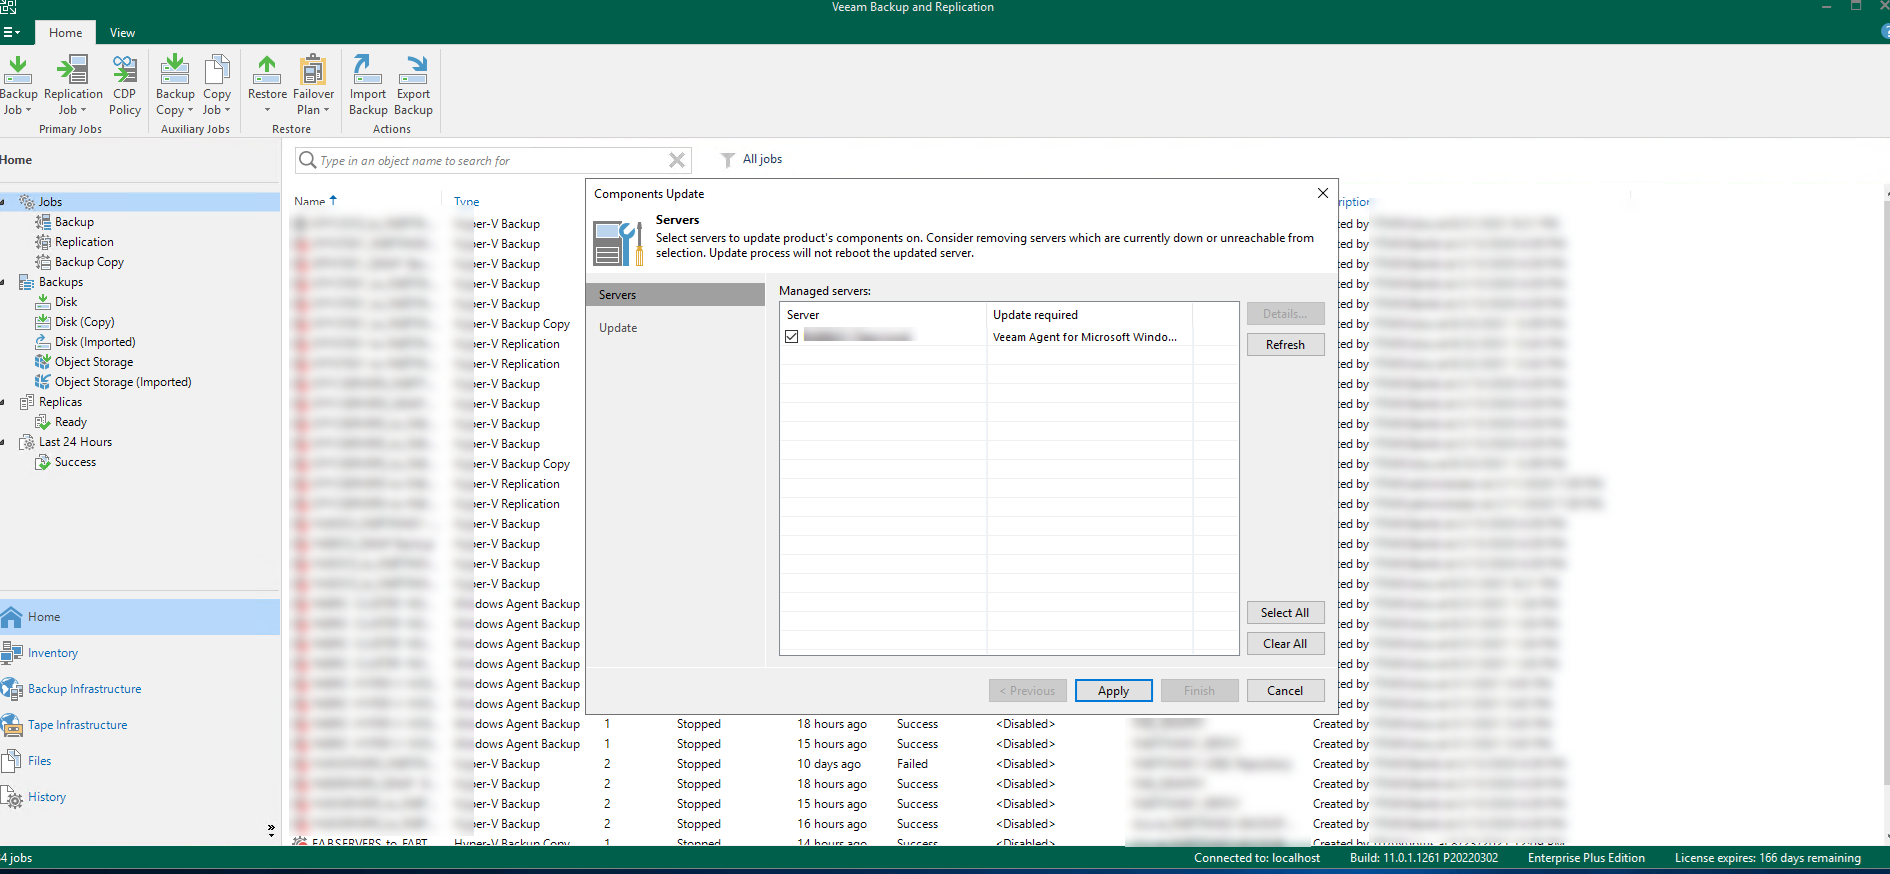 031422 1949 Howtoinstal10 - How to install cumulative patches 11.0.1.1261 P20220302 for Veeam Backup & Replication 11a